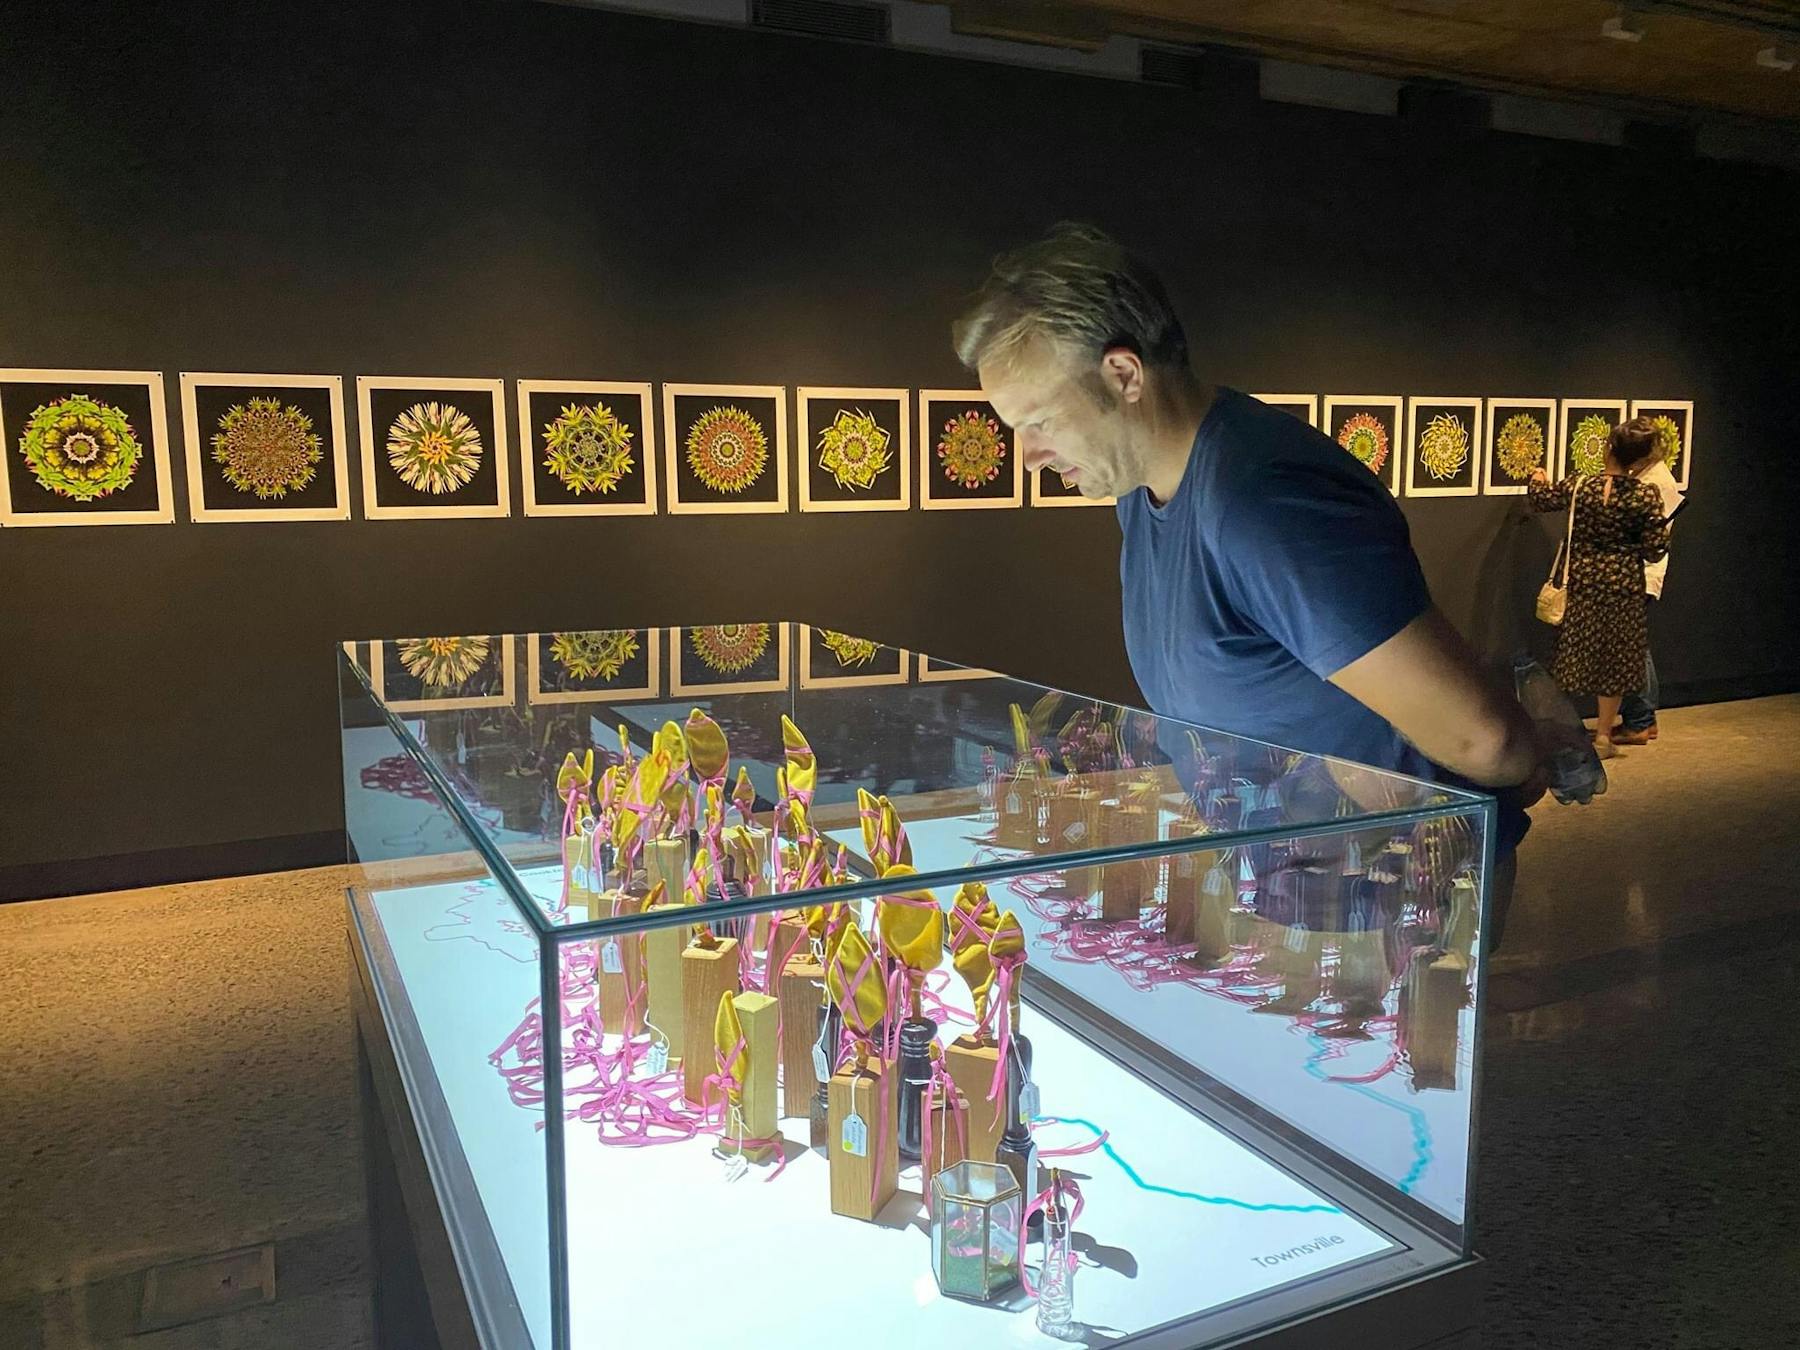 A man looks at a vitrine containing contemporary art sculptures in a darkened gallery with prinrs